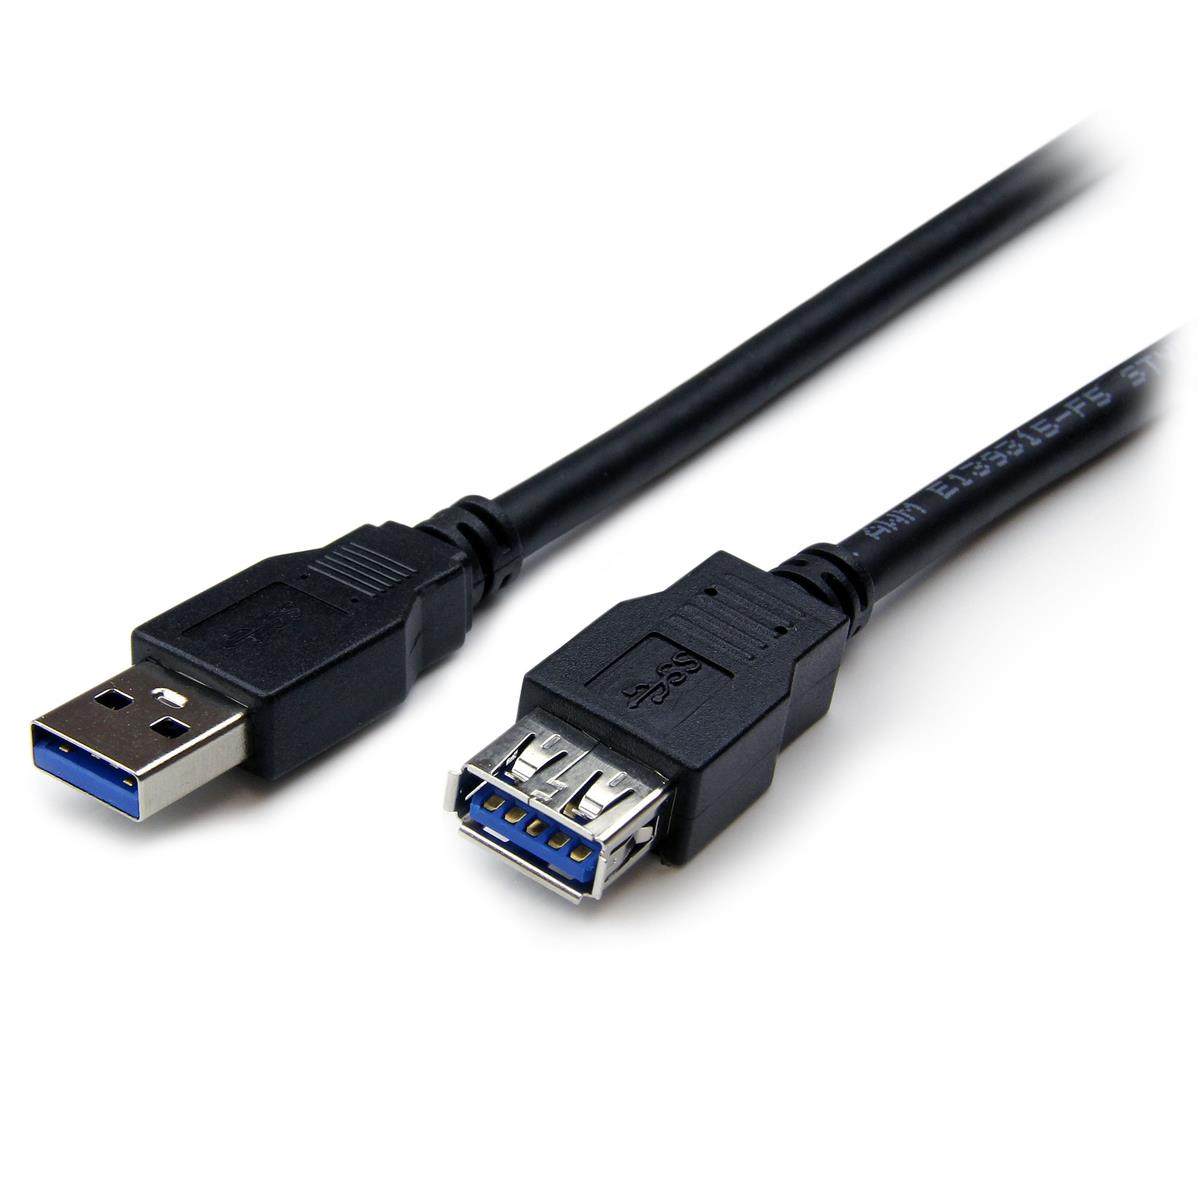 Photos - Other for Computer Startech.com StarTech 6' SuperSpeed USB 3.0 Extension Cable, 28 AWG USB3SEXT6BK 